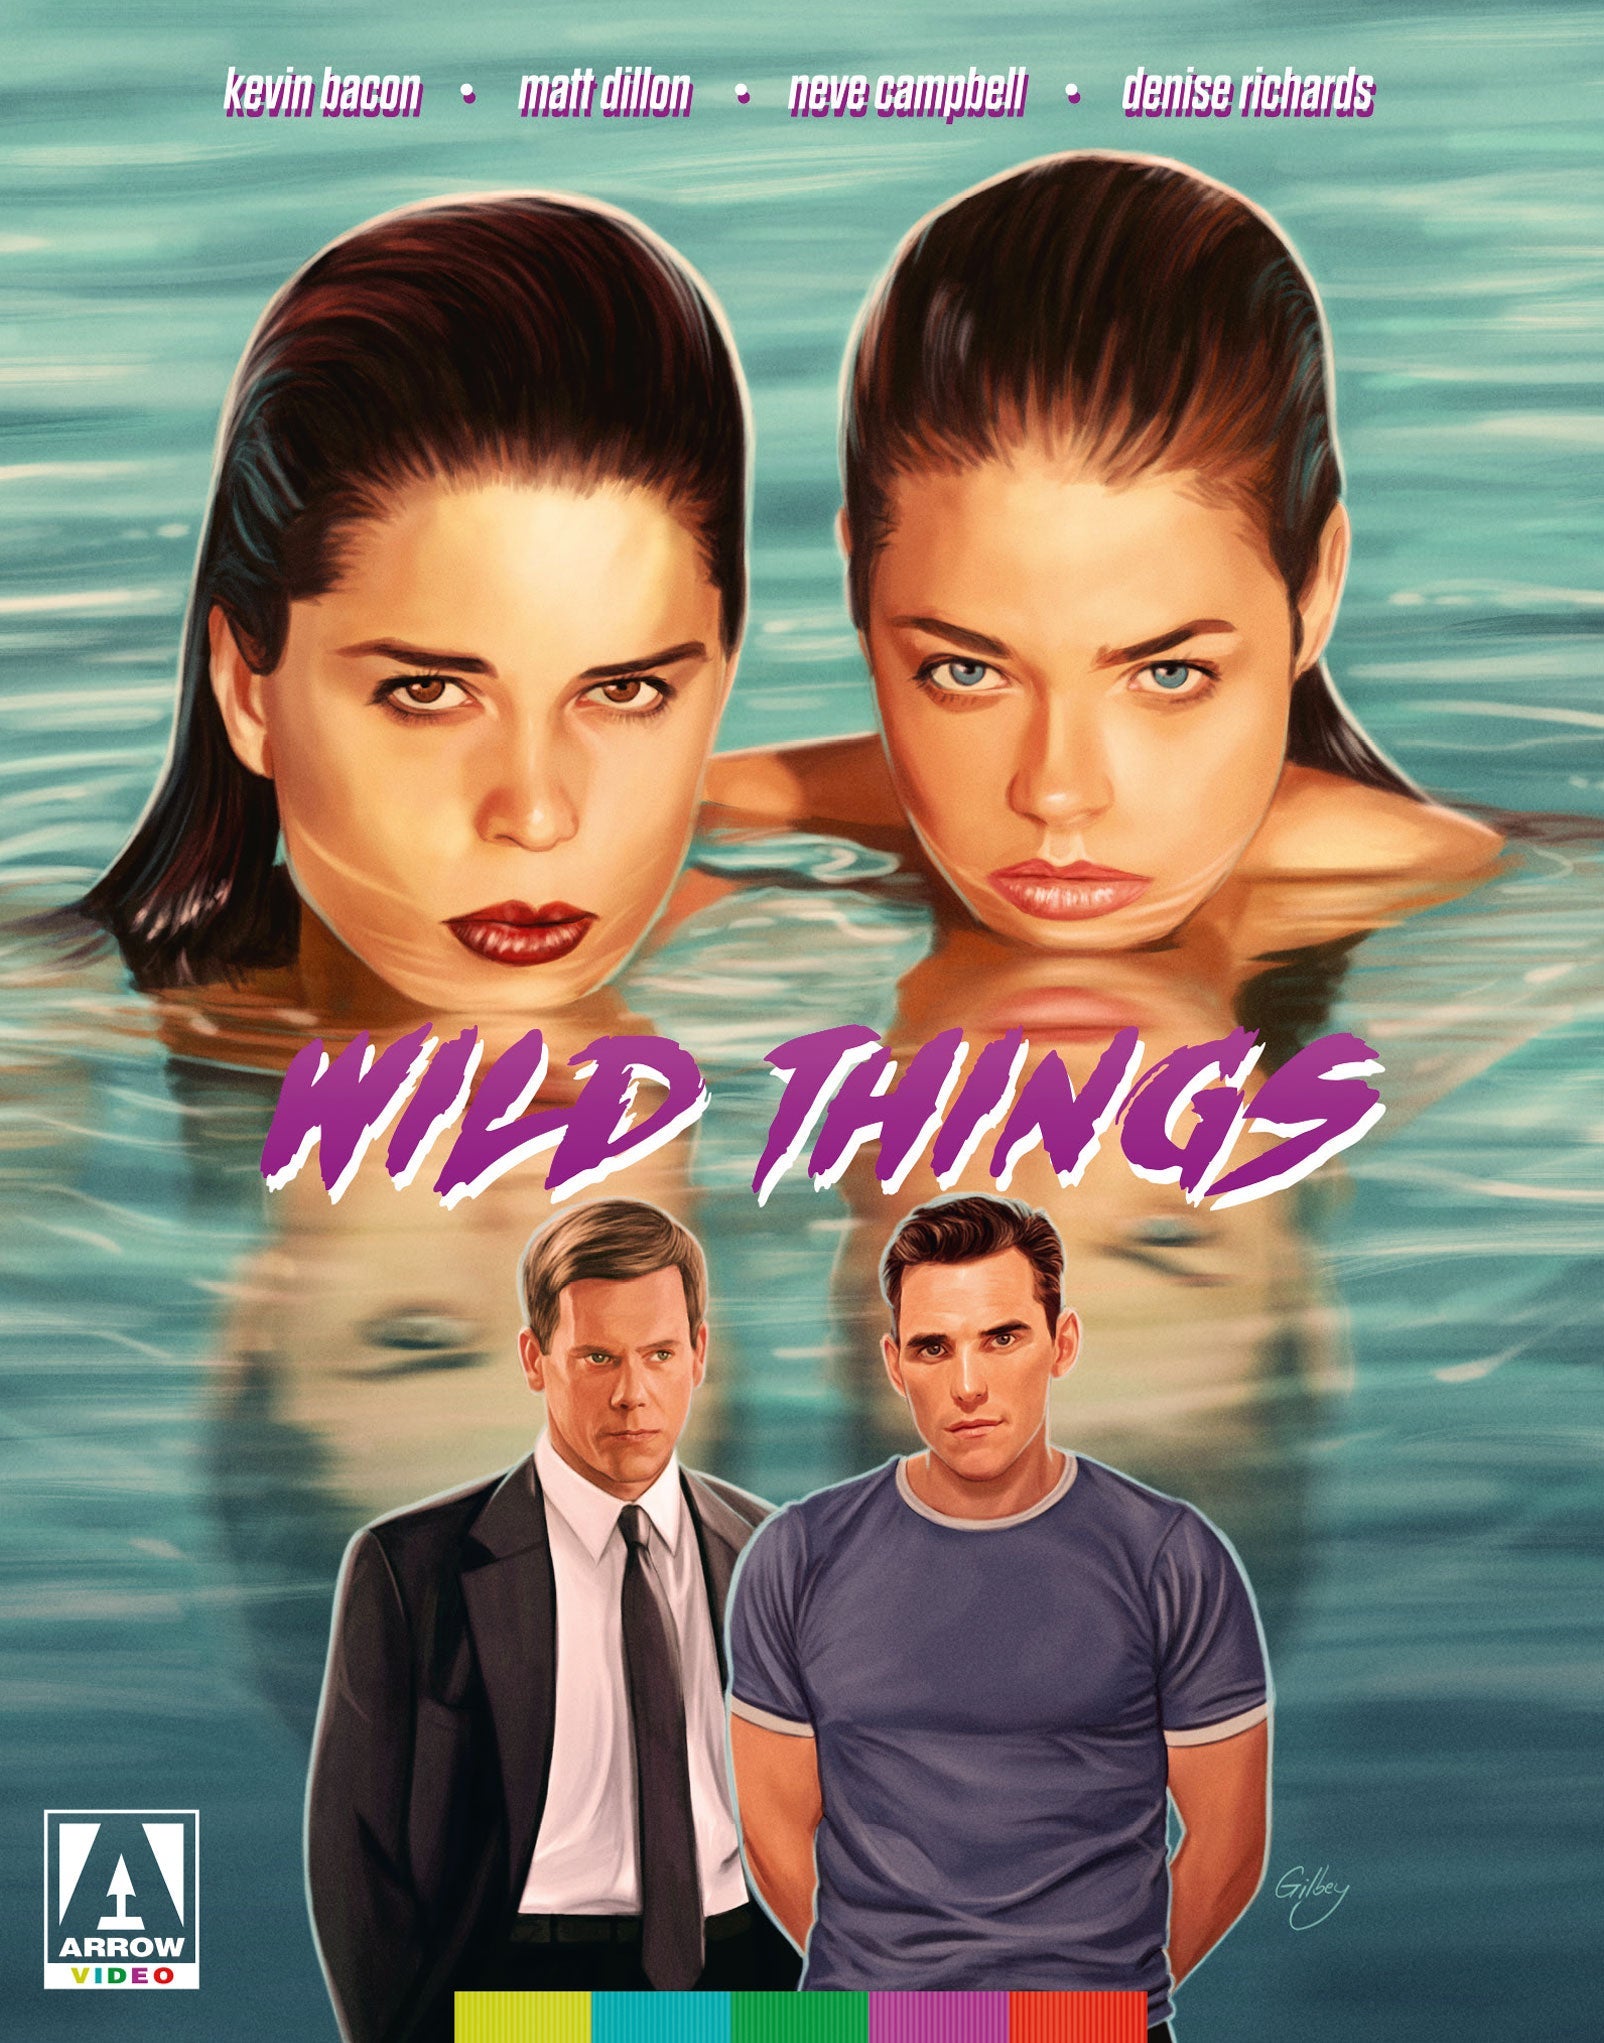 WILD THINGS (DELUXE LIMITED EDITION - EXCLUSIVE) 4K UHD/BLU-RAY STEELBOOK [SCRATCH AND DENT]